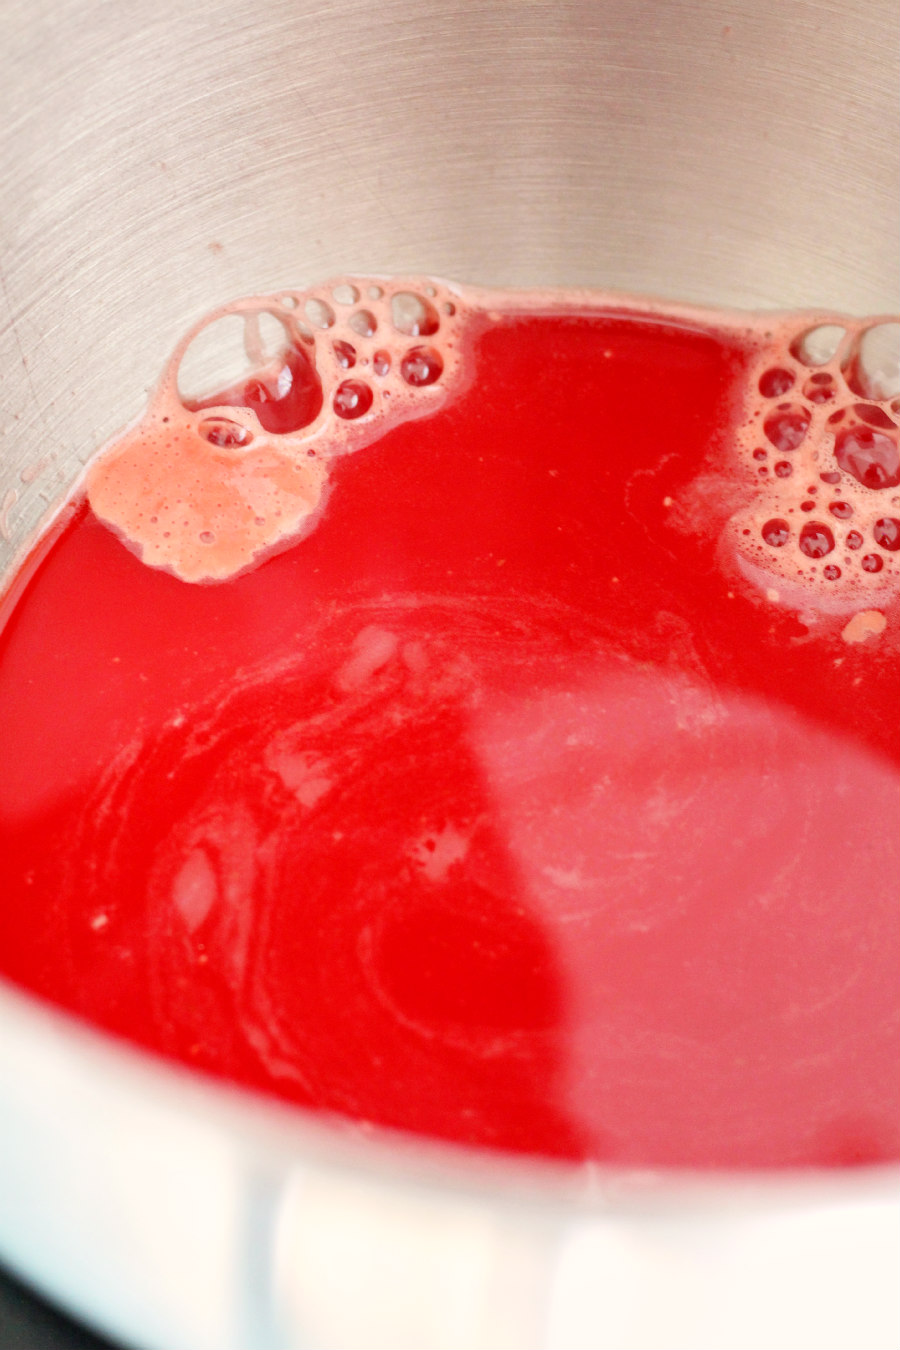 Beet juice, honey, and yeast in a metal mixing bowl.